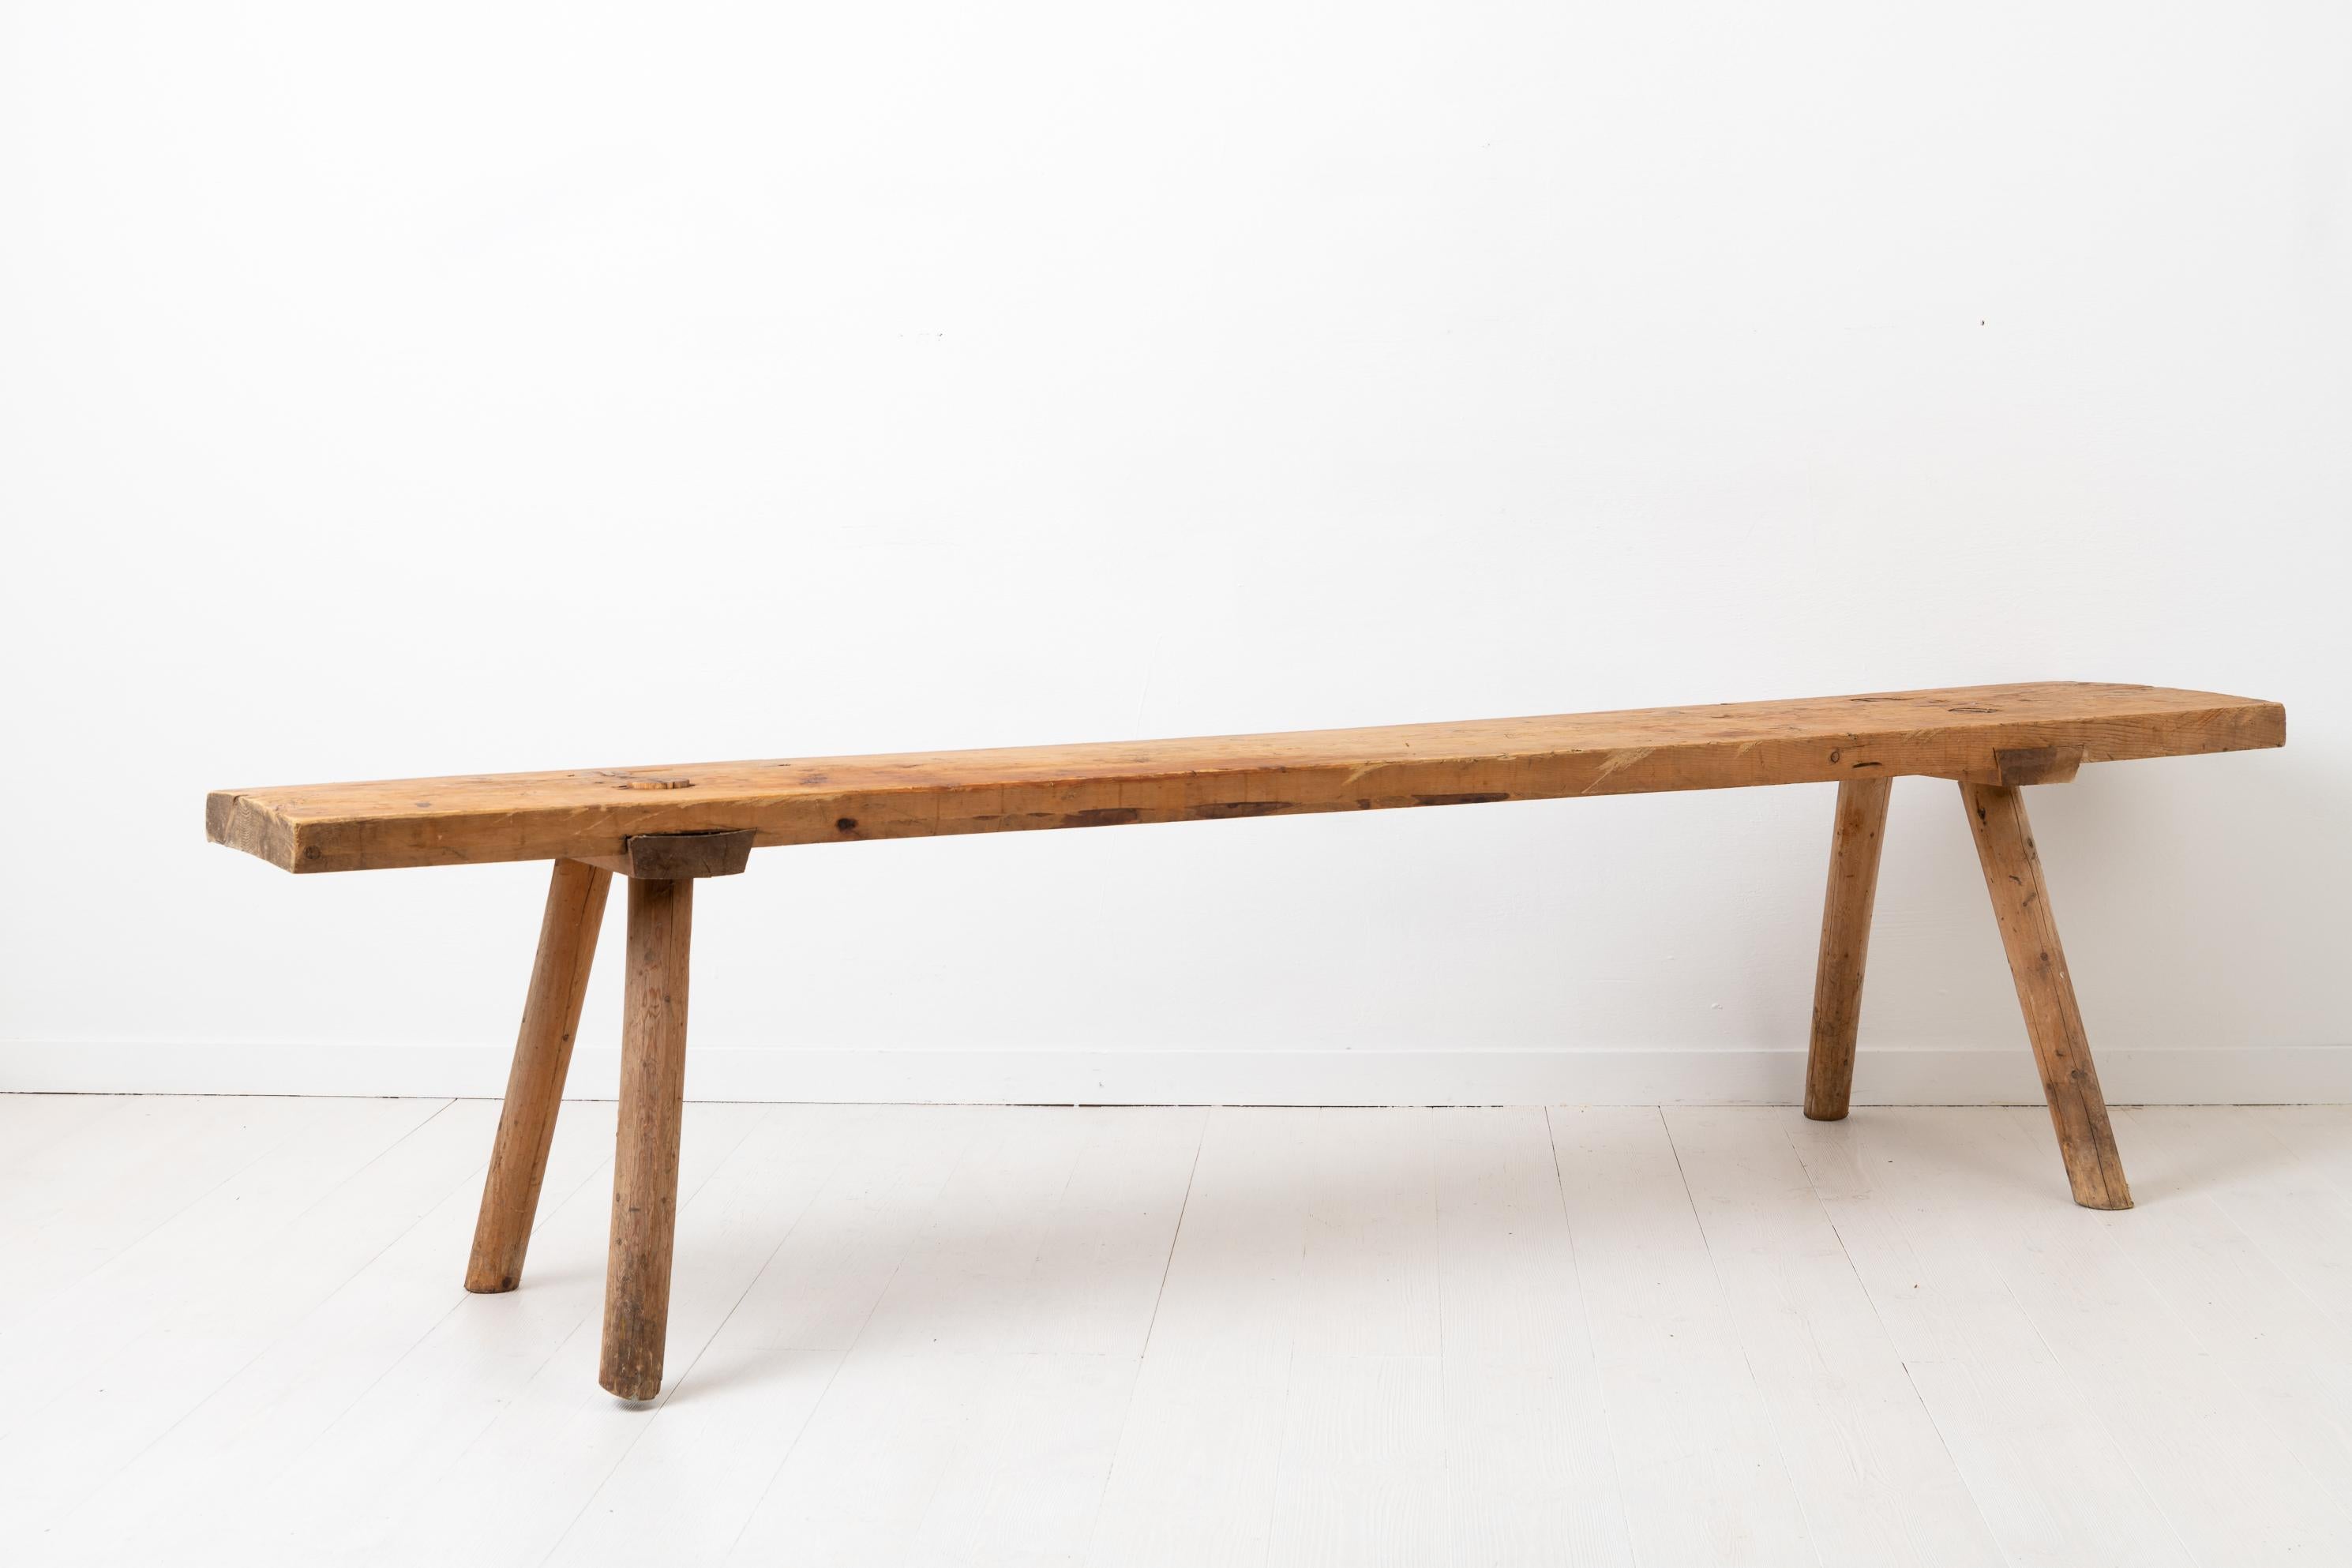 Hand-Crafted Wide Antique Swedish Solid Pine Bench